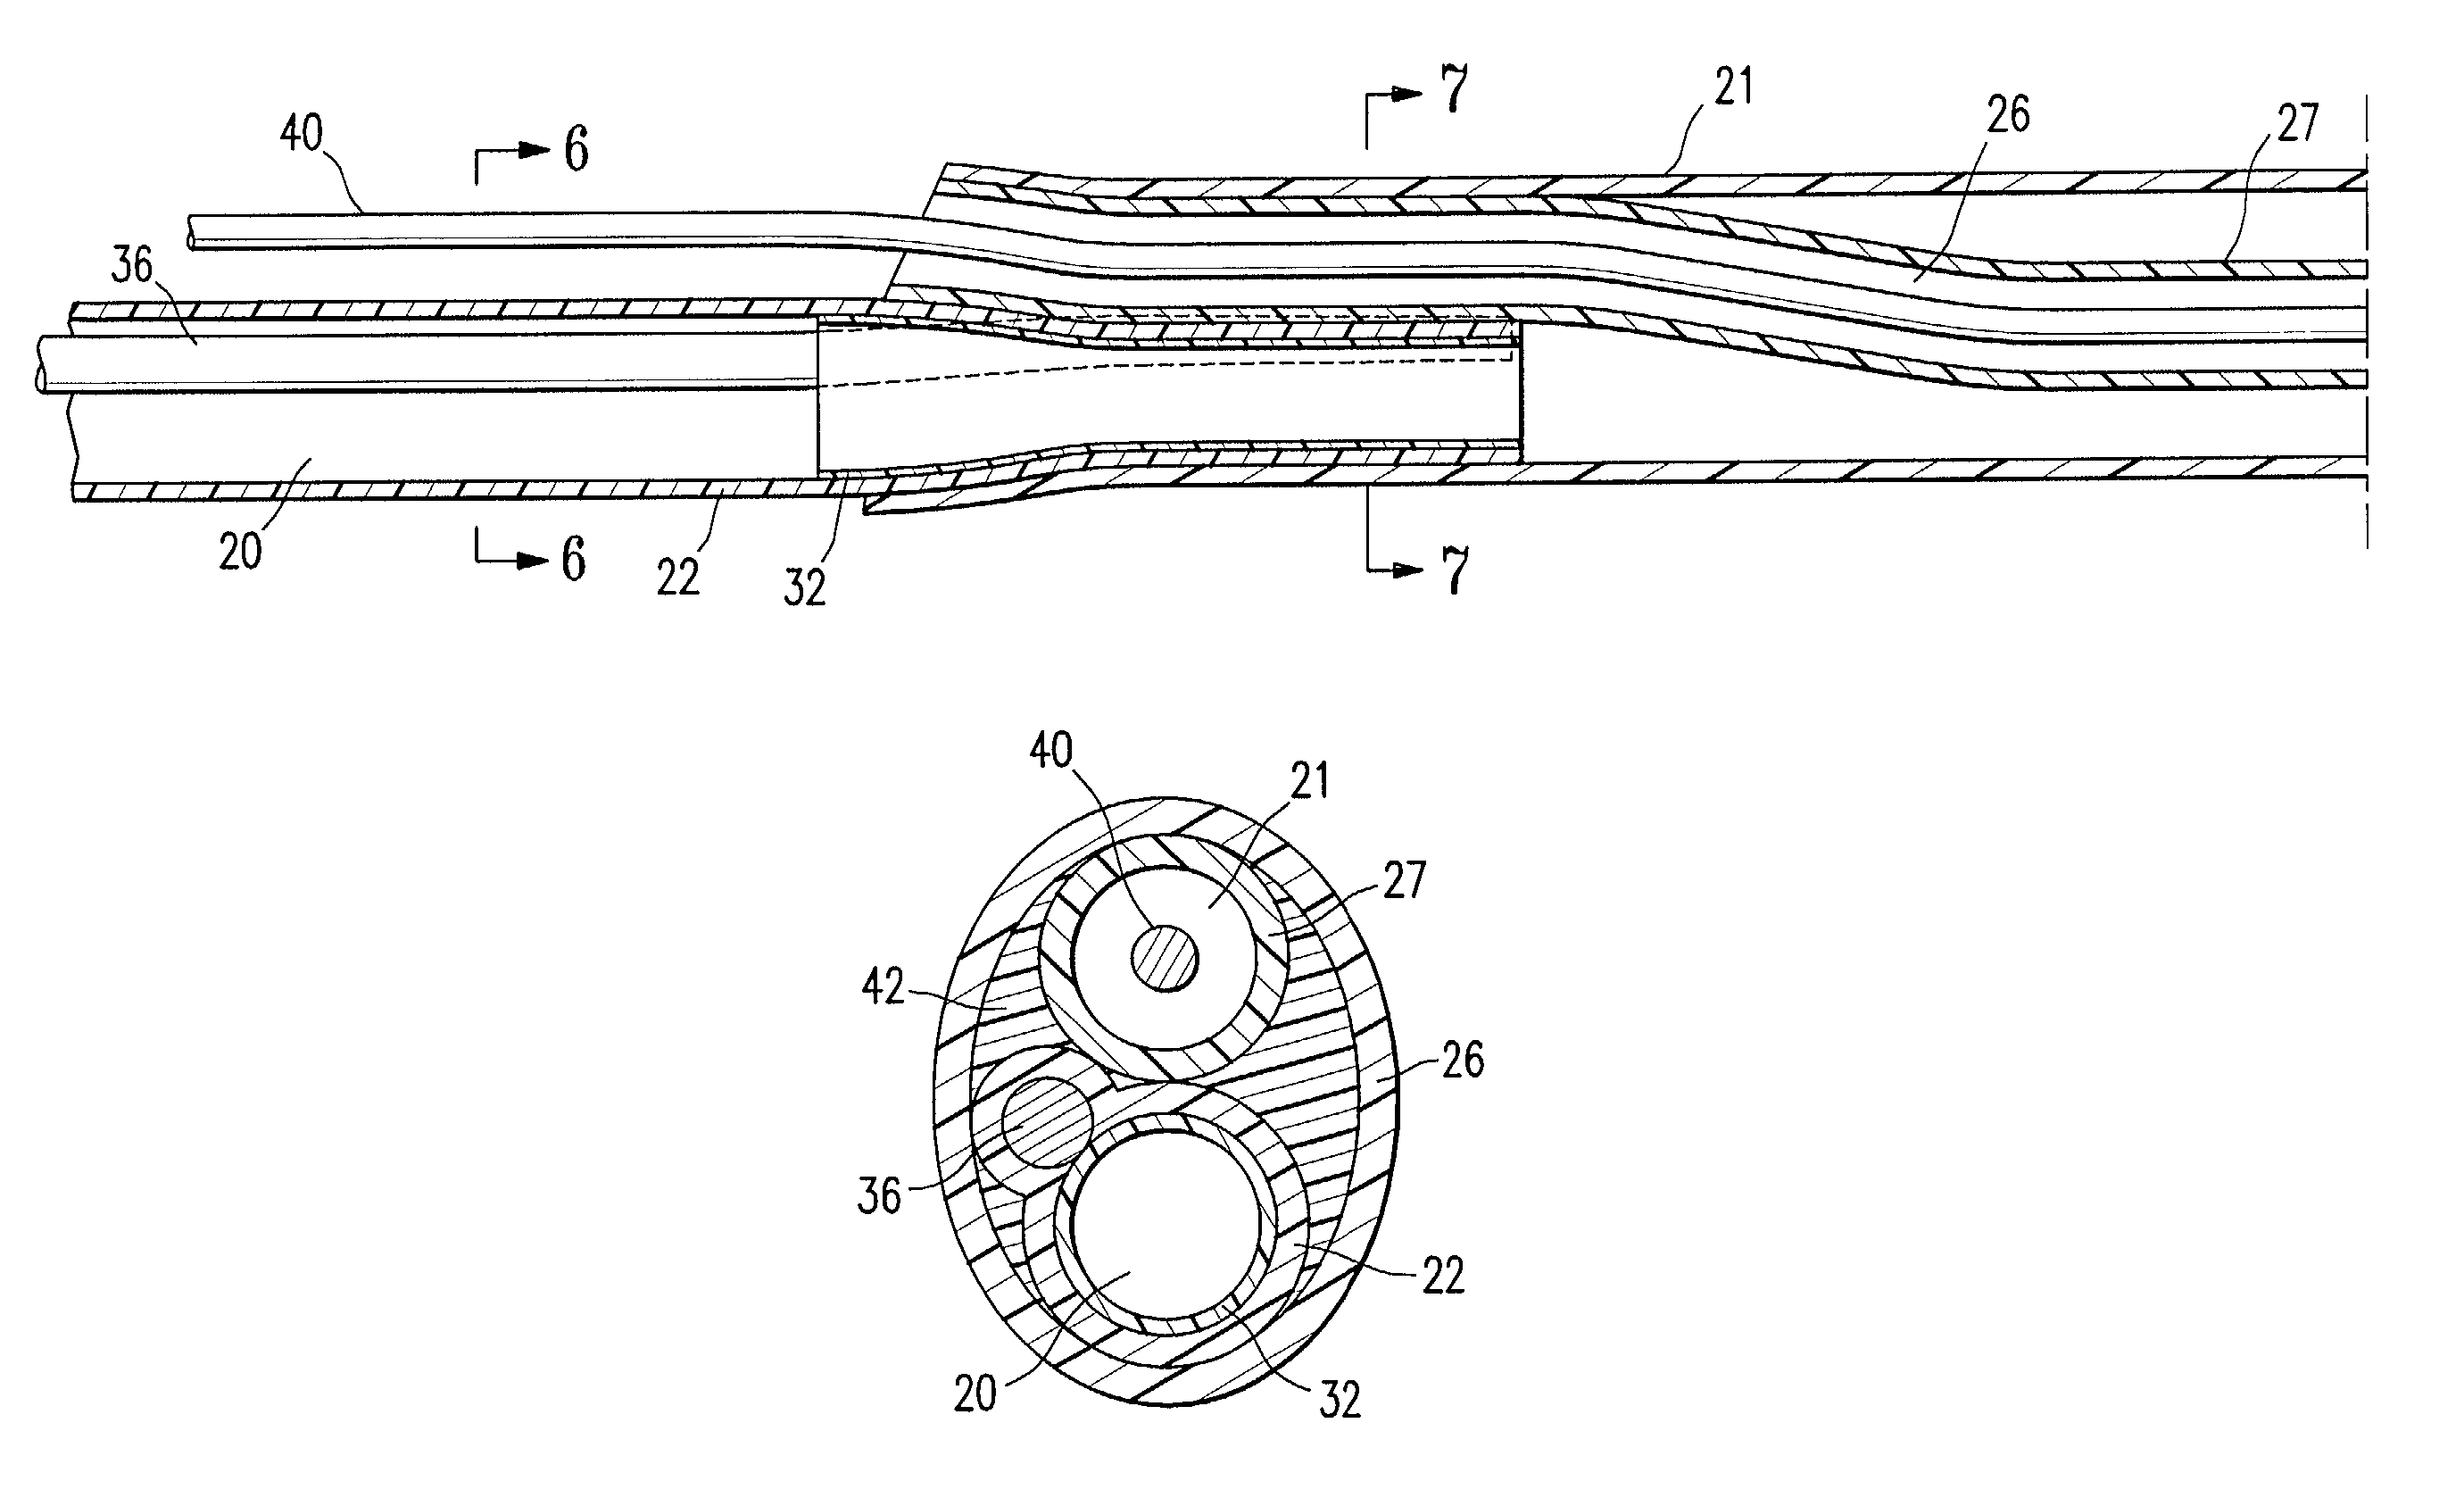 Catheter shaft junction having a polymeric reinforcing member with a high glass transition temperature